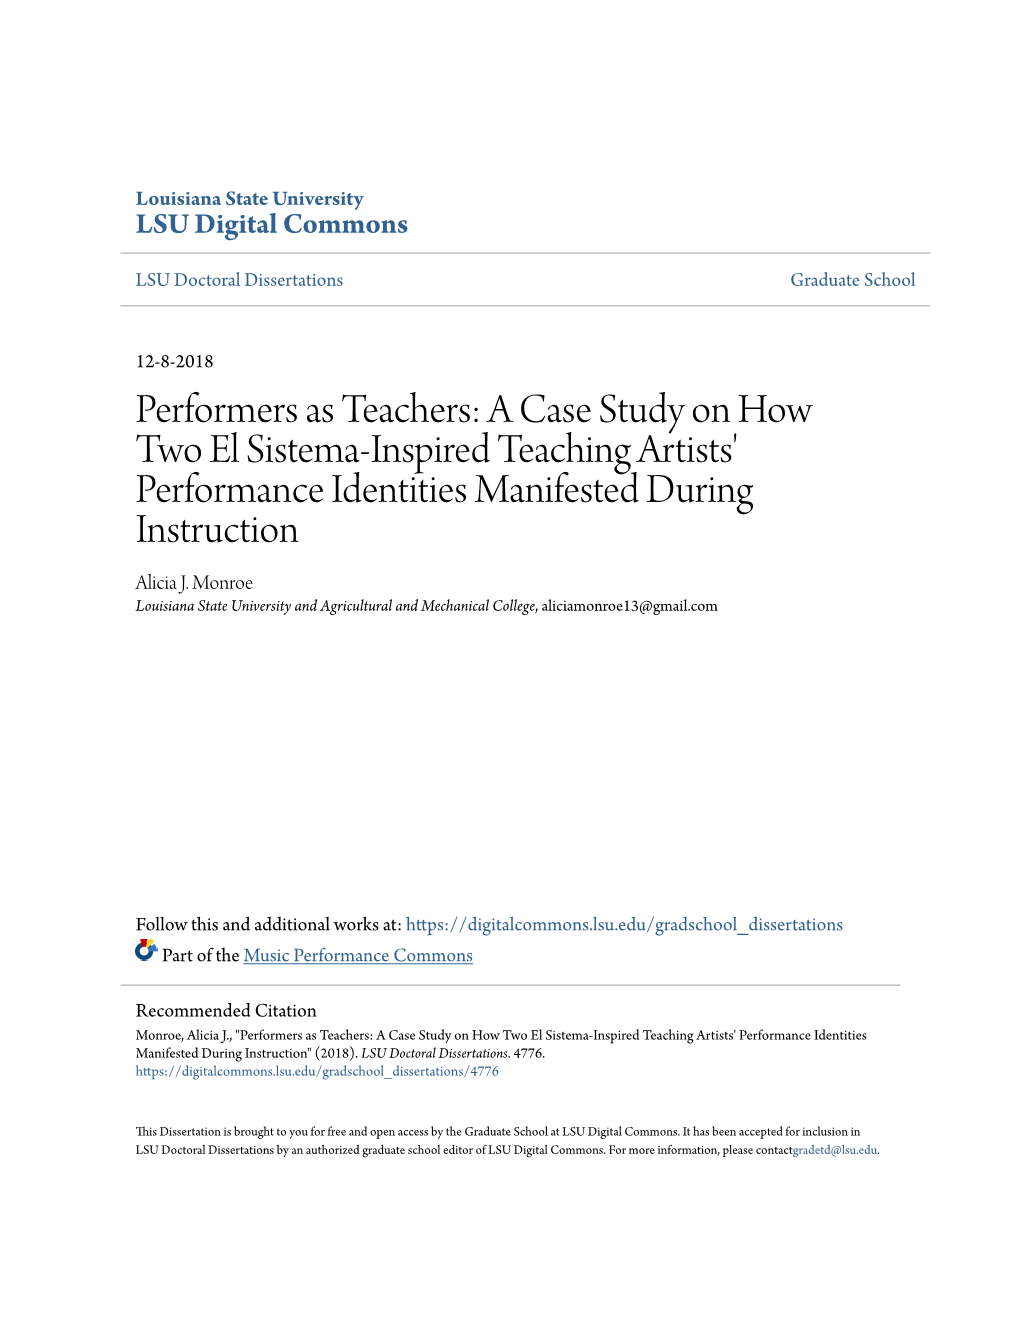 A Case Study on How Two El Sistema-Inspired Teaching Artists' Performance Identities Manifested During Instruction Alicia J